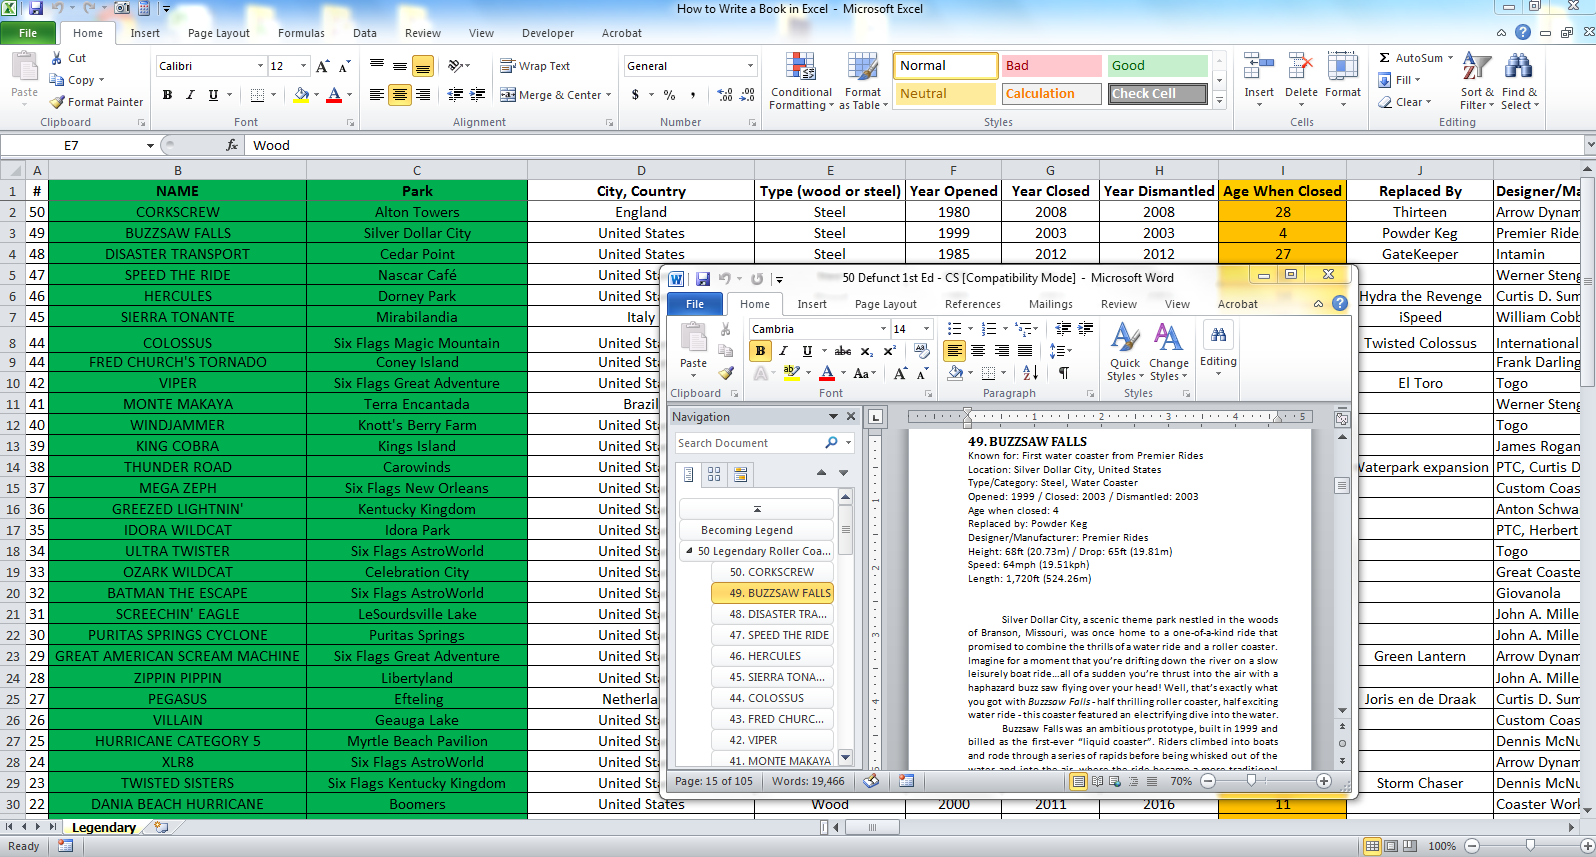 Excel Spreadsheets Help: How to Write a Book Fast by Using Excel